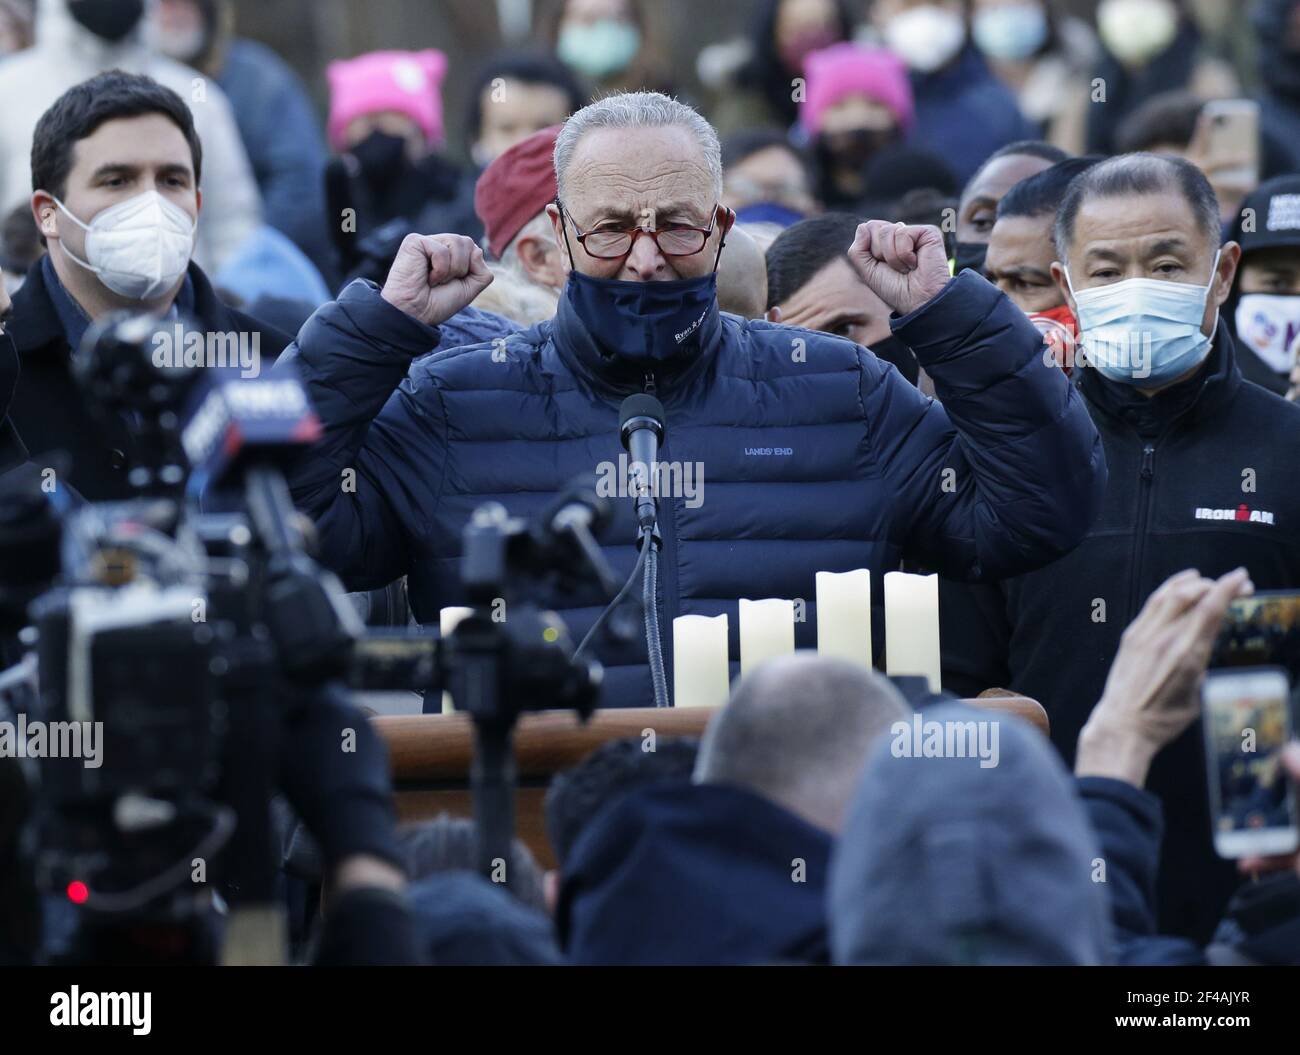 New York, United States. 19th Mar, 2021. Sen. Chuck Schumer speaks at a Vigil for Peace organized by Asian American Federation in Union Square in New York City on Friday, March 19, 2021. President Biden on Friday urged Congress to pass hate crime legislation to address the increase in discrimination and violence against Asian Americans during the COVID-19 pandemic. Photo by John Angelillo/UPI Credit: UPI/Alamy Live News Stock Photo